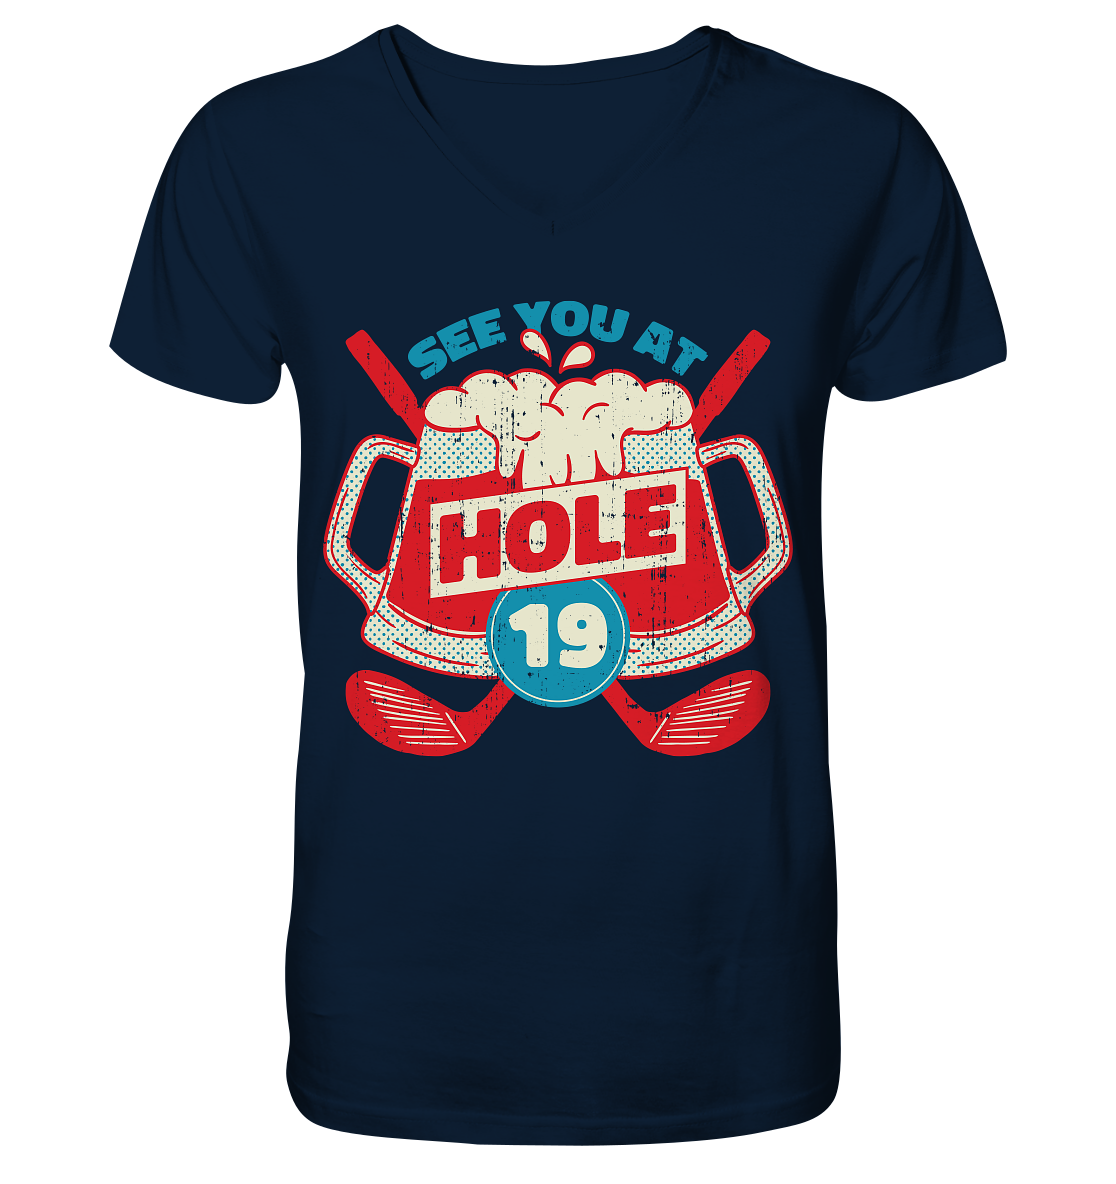 Golf ,See you at Hole 19 , Wir sehen uns bei Loch 19 - Mens Organic V-Neck Shirt